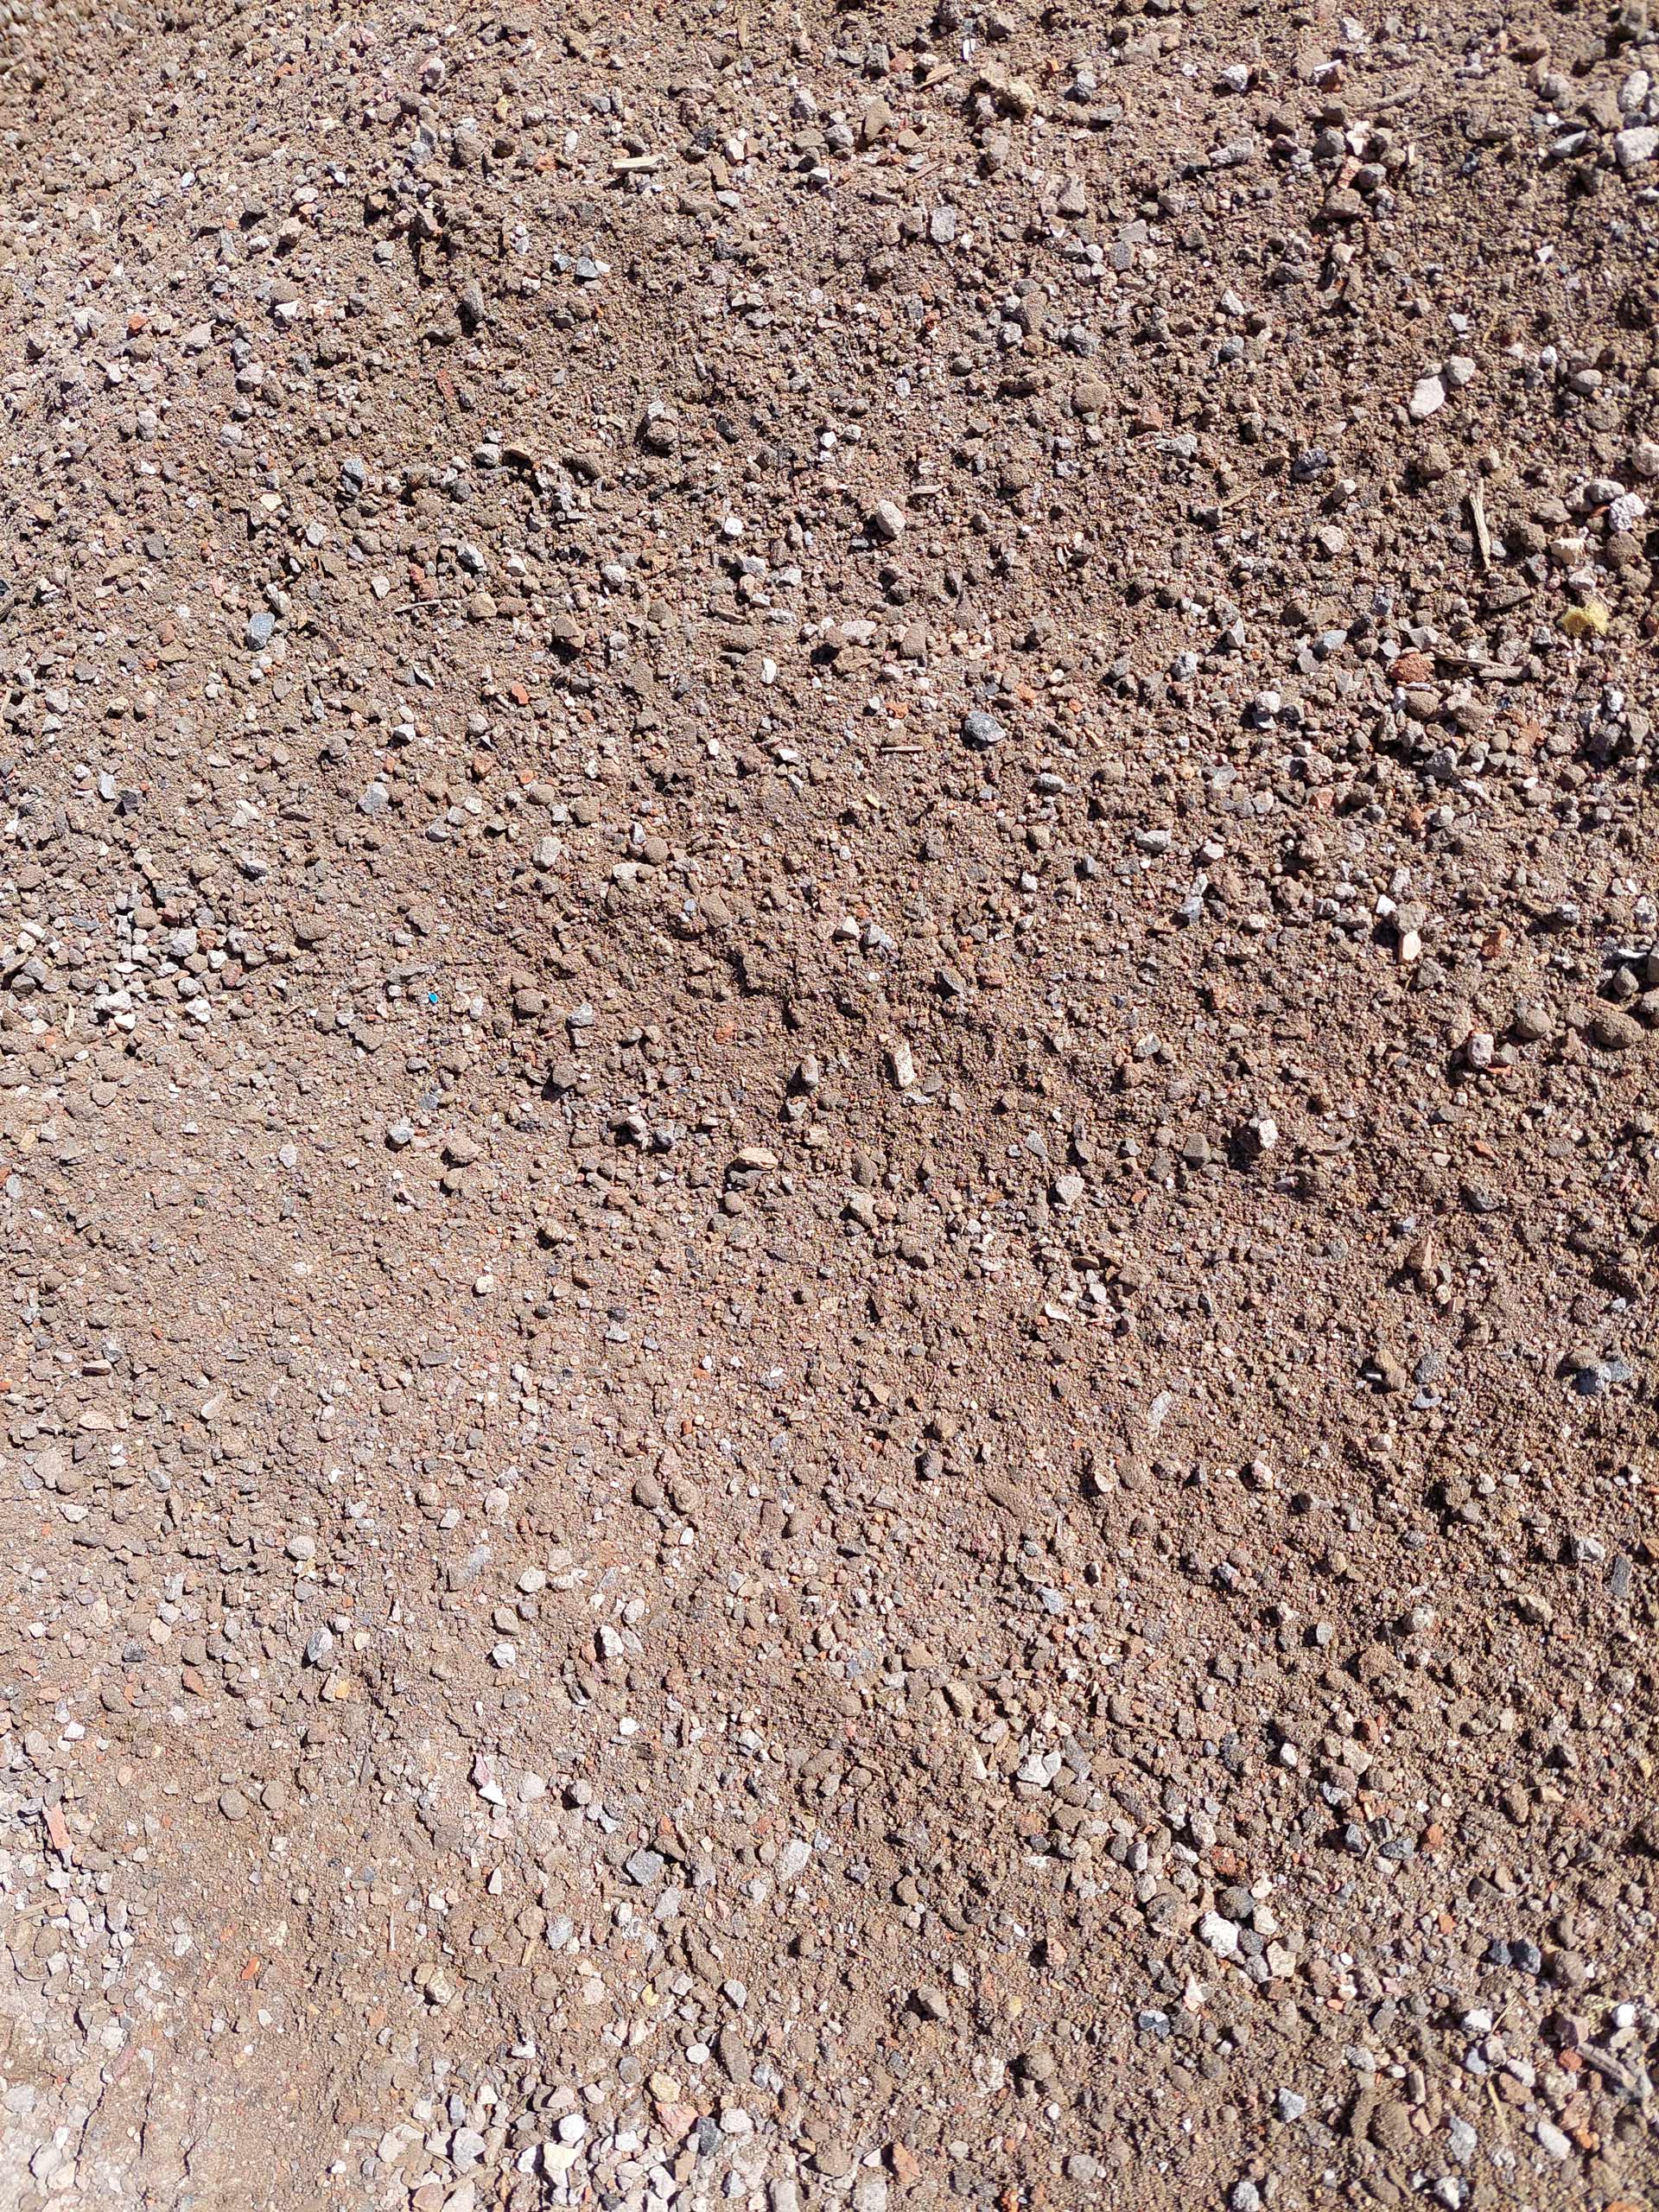 20mm Recycled Aggregate | Tahmoor, Nsw | Mark’s Landscape Supplies